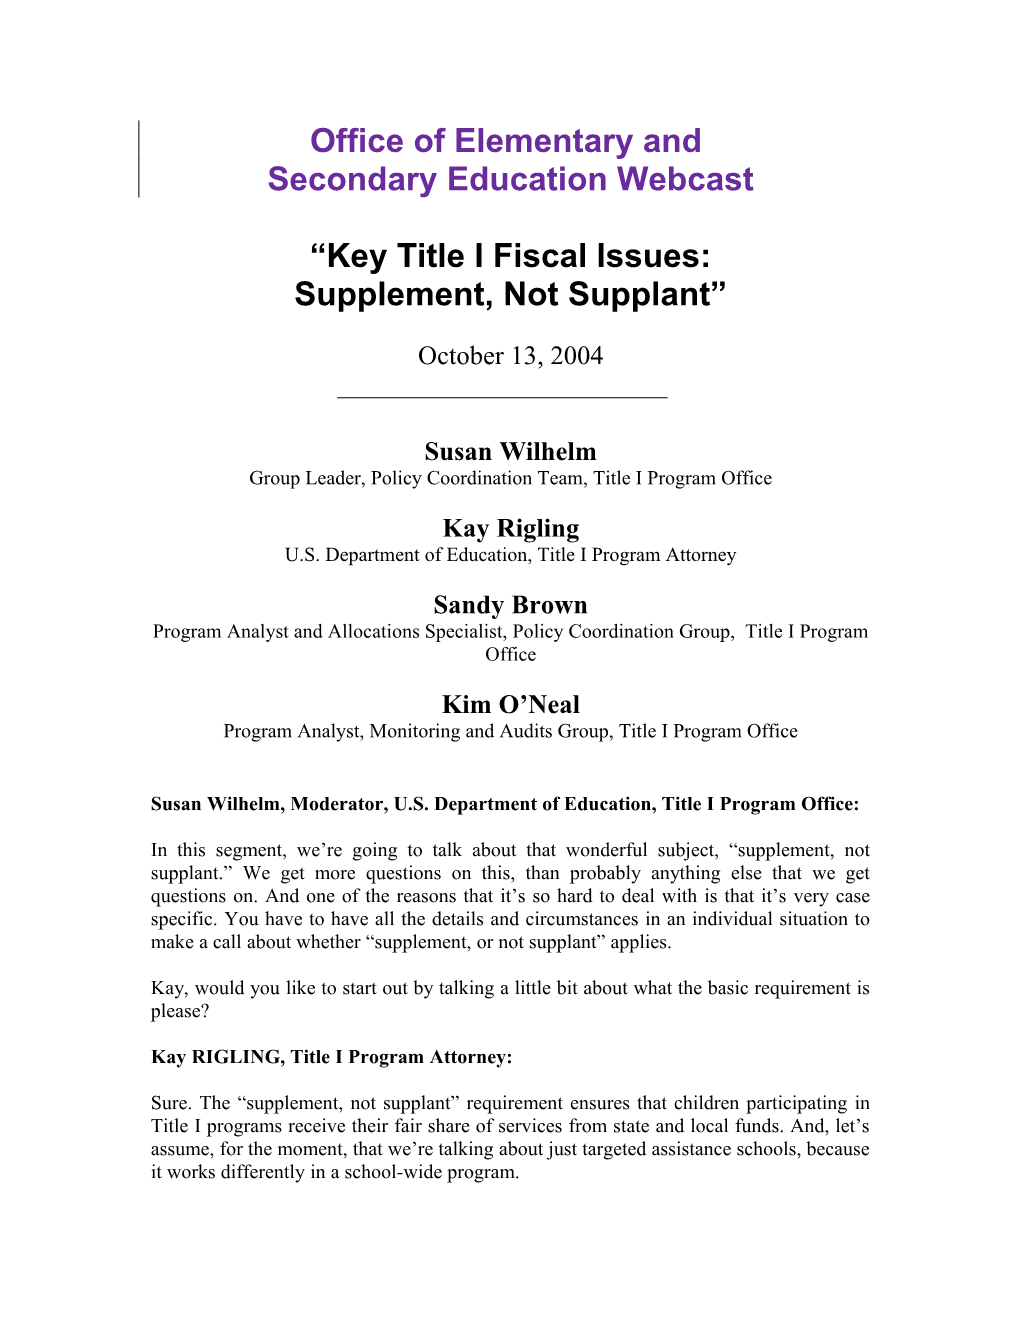 Office of Elementary and Secondary Education Webcast: Key Title I Fiscal Issues: Supplement